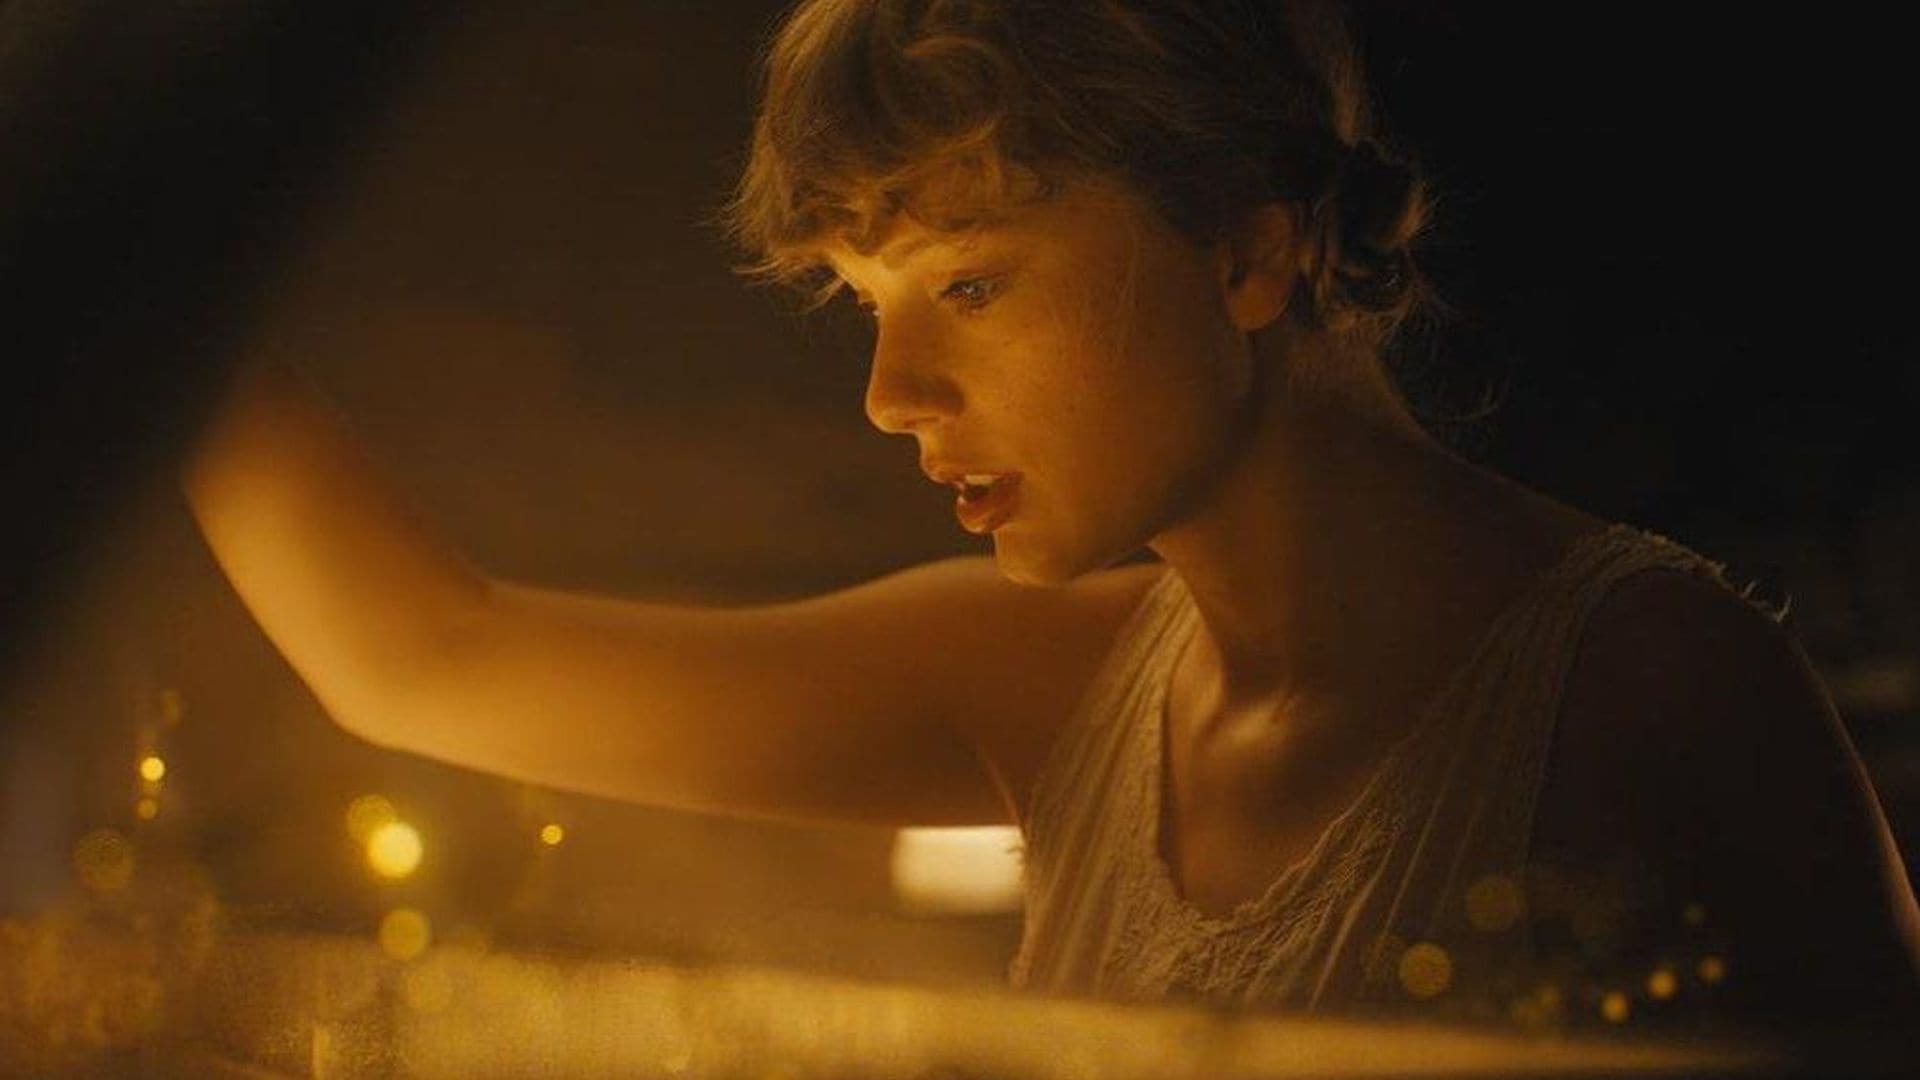 Watch new music video ‘Cardigan’ from Taylor Swift’s surprise album ‘Folklore’